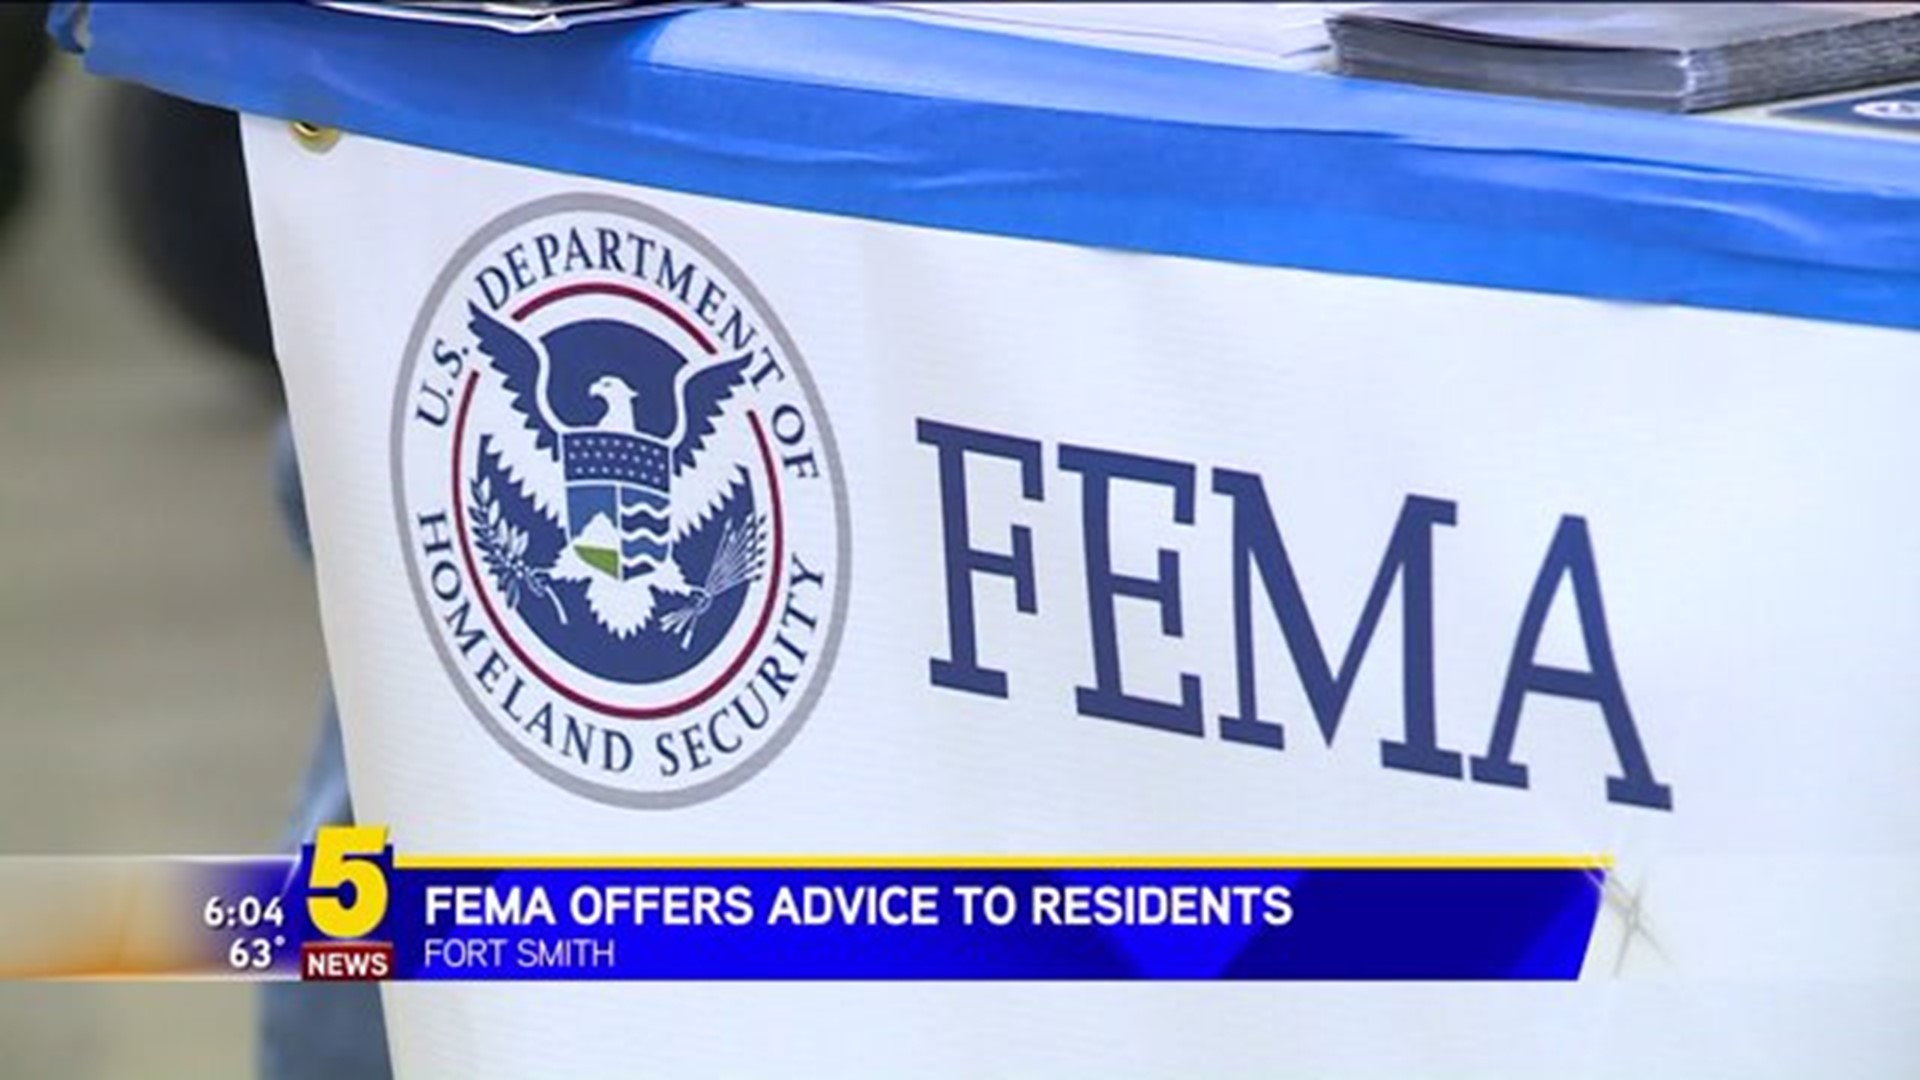 Fema Offers Advice To Residents